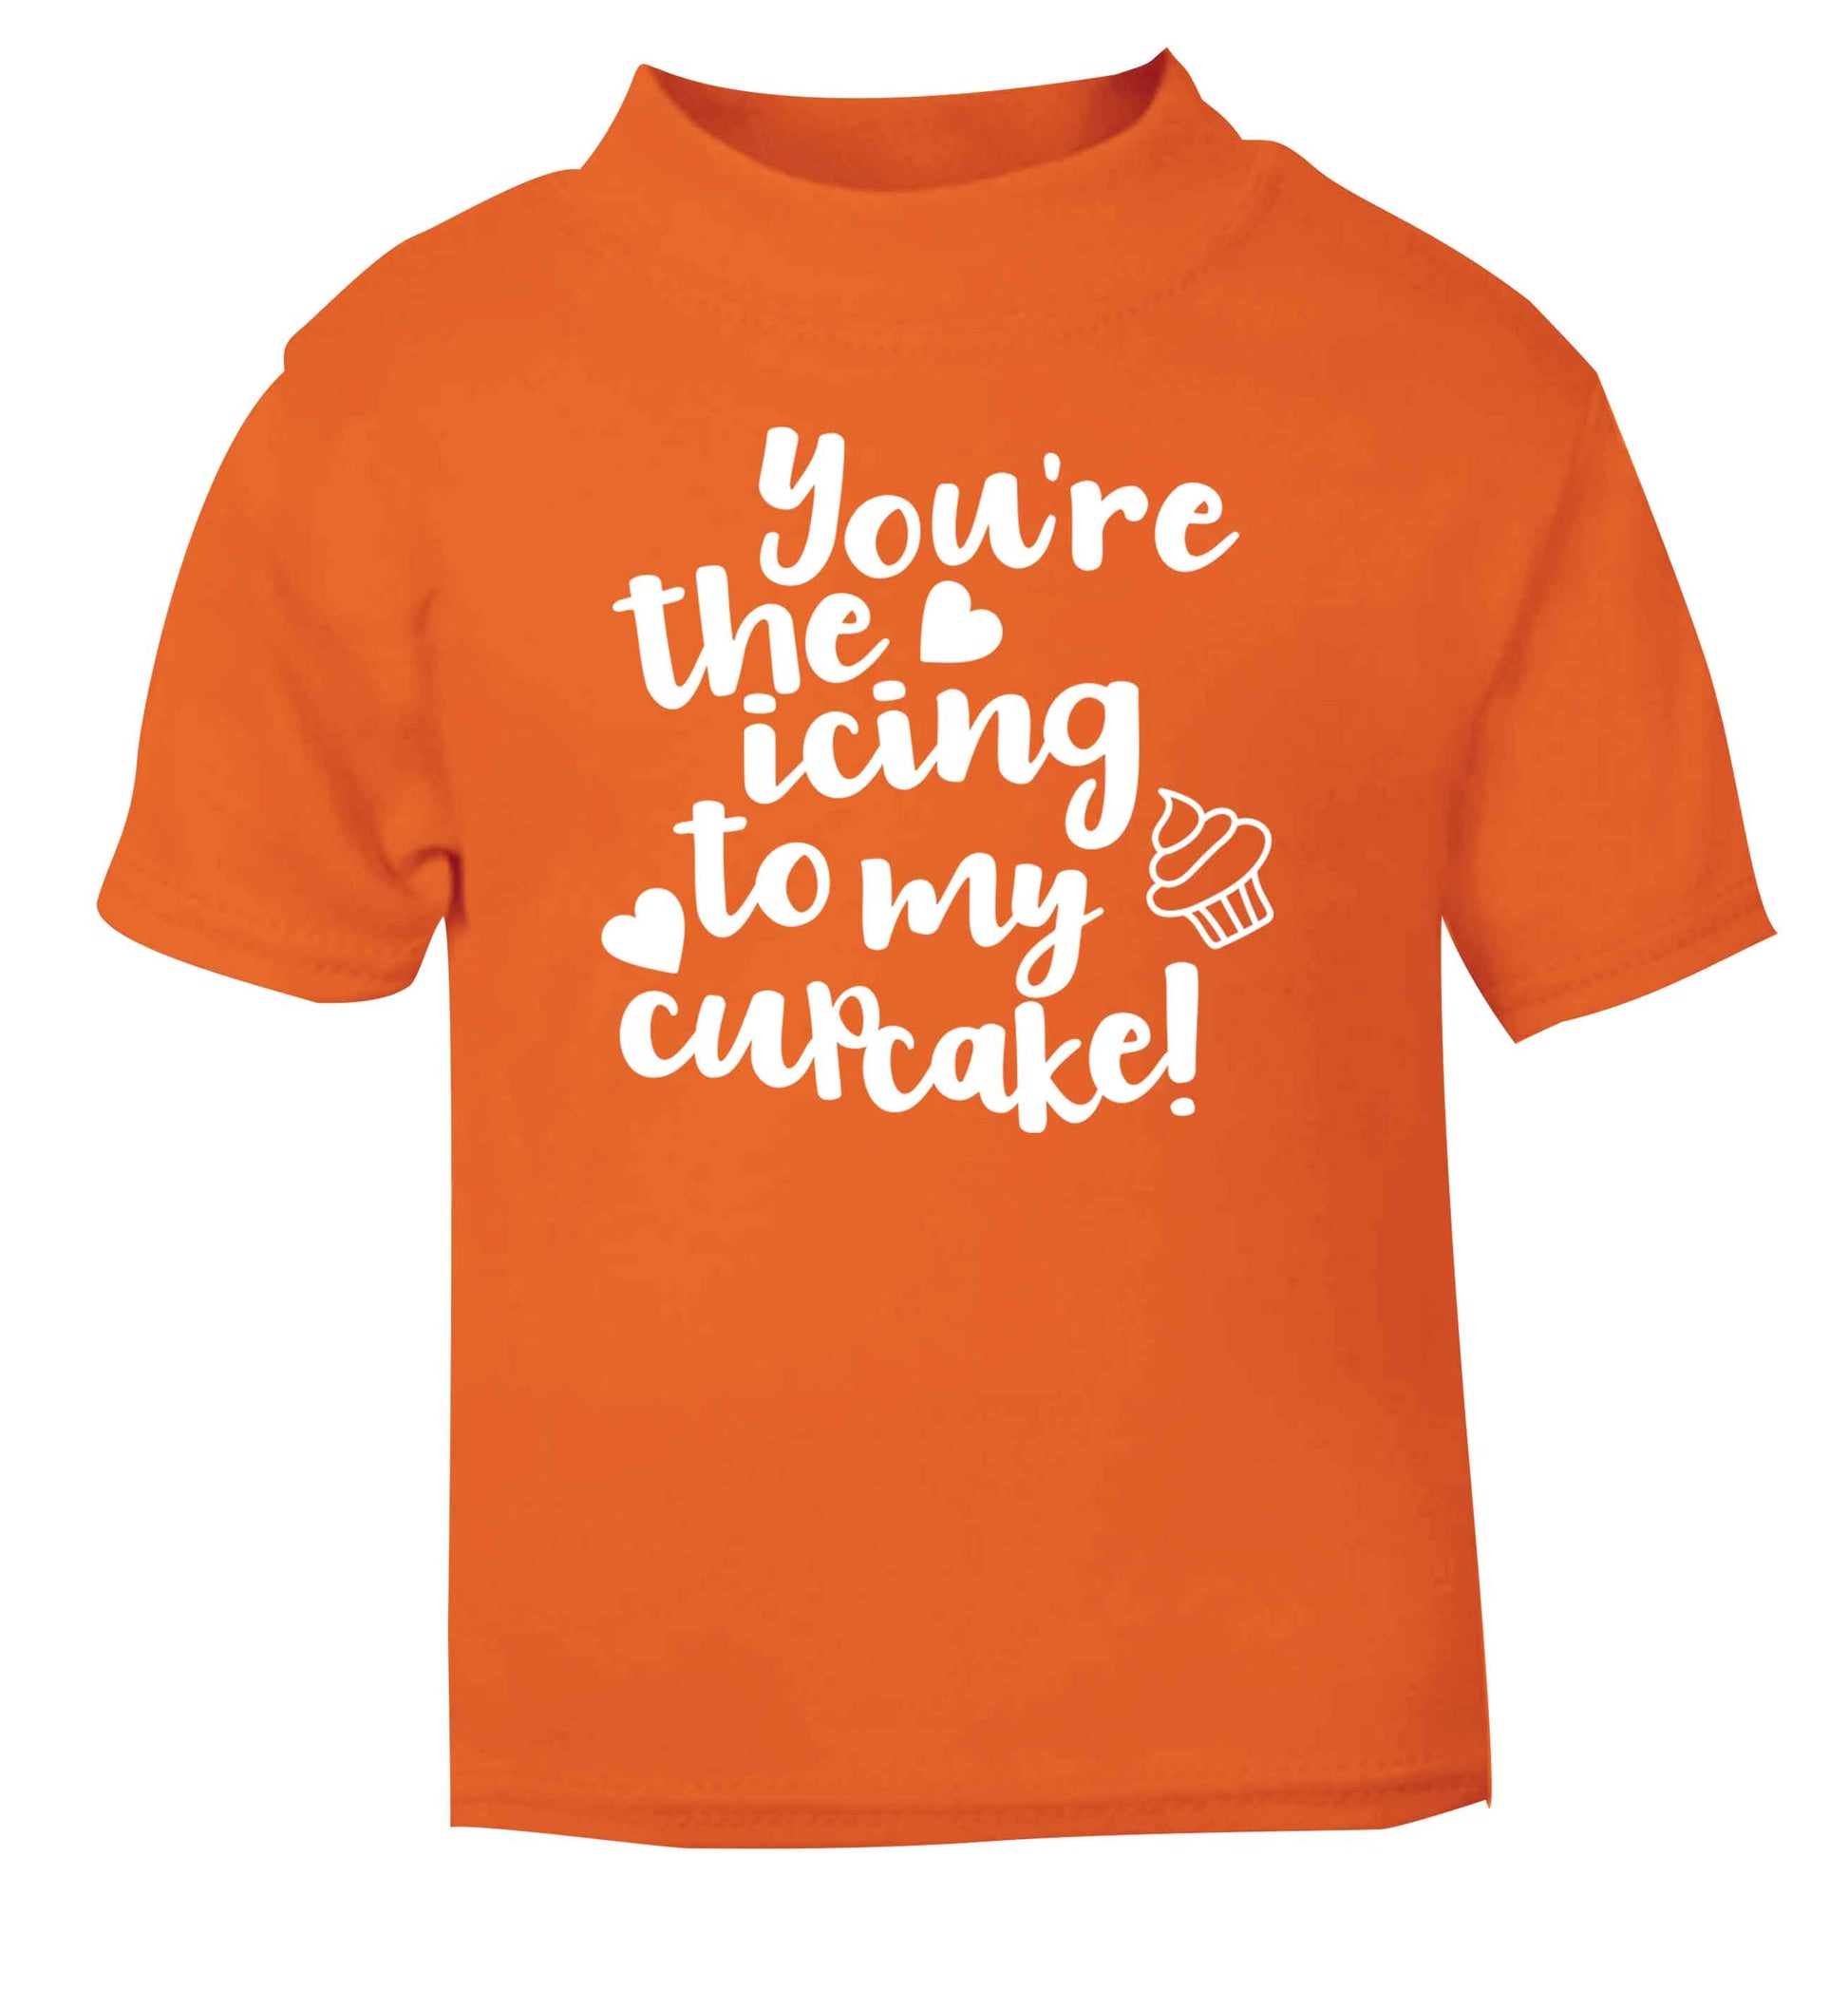 You're the icing to my cupcake orange Baby Toddler Tshirt 2 Years